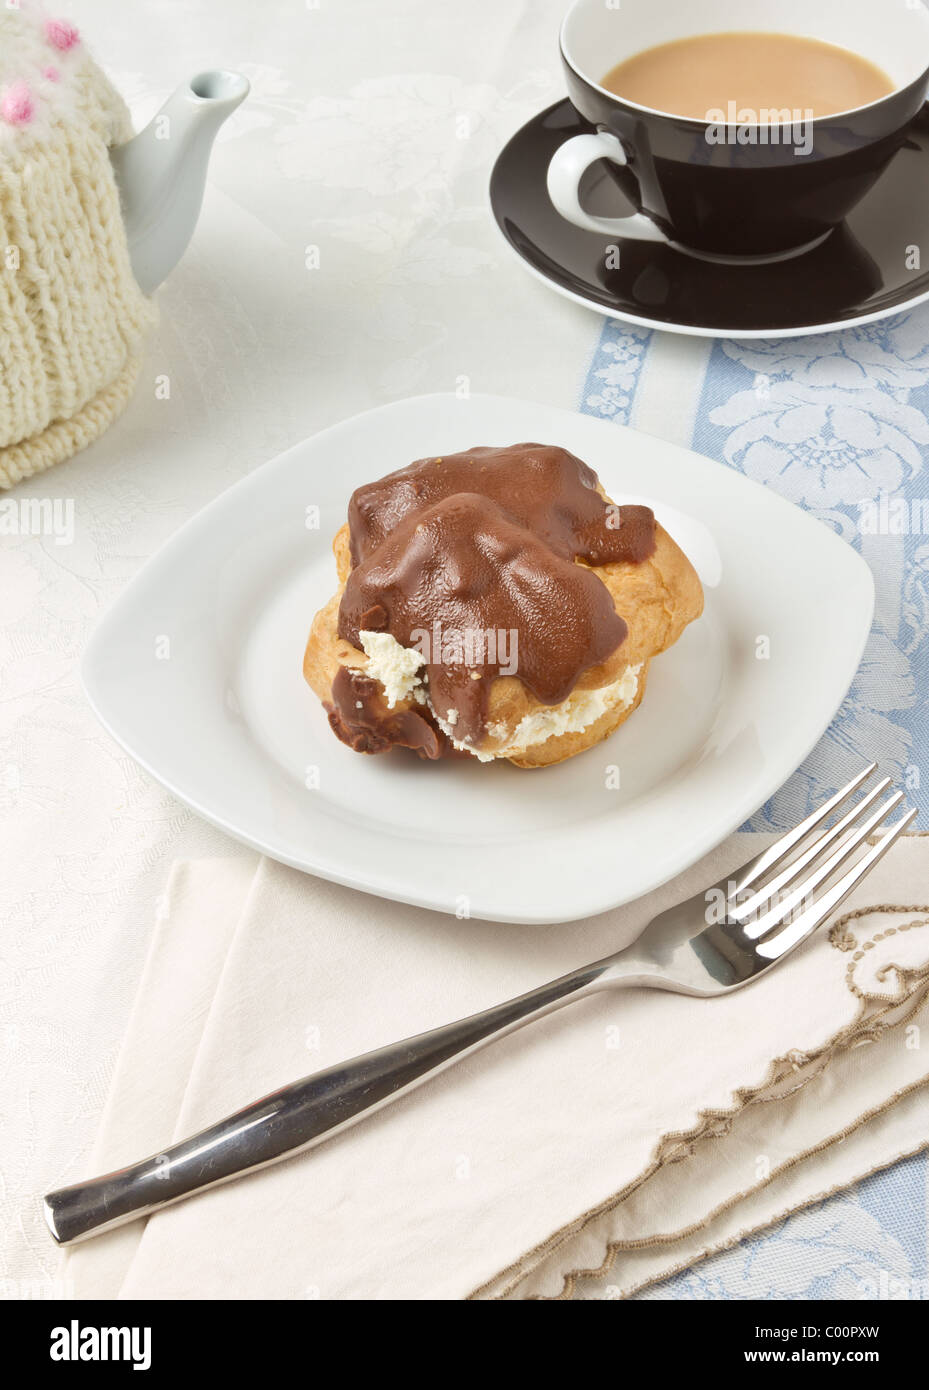 Afternoon Tea with chocolate covered choux pastry bun. Stock Photo